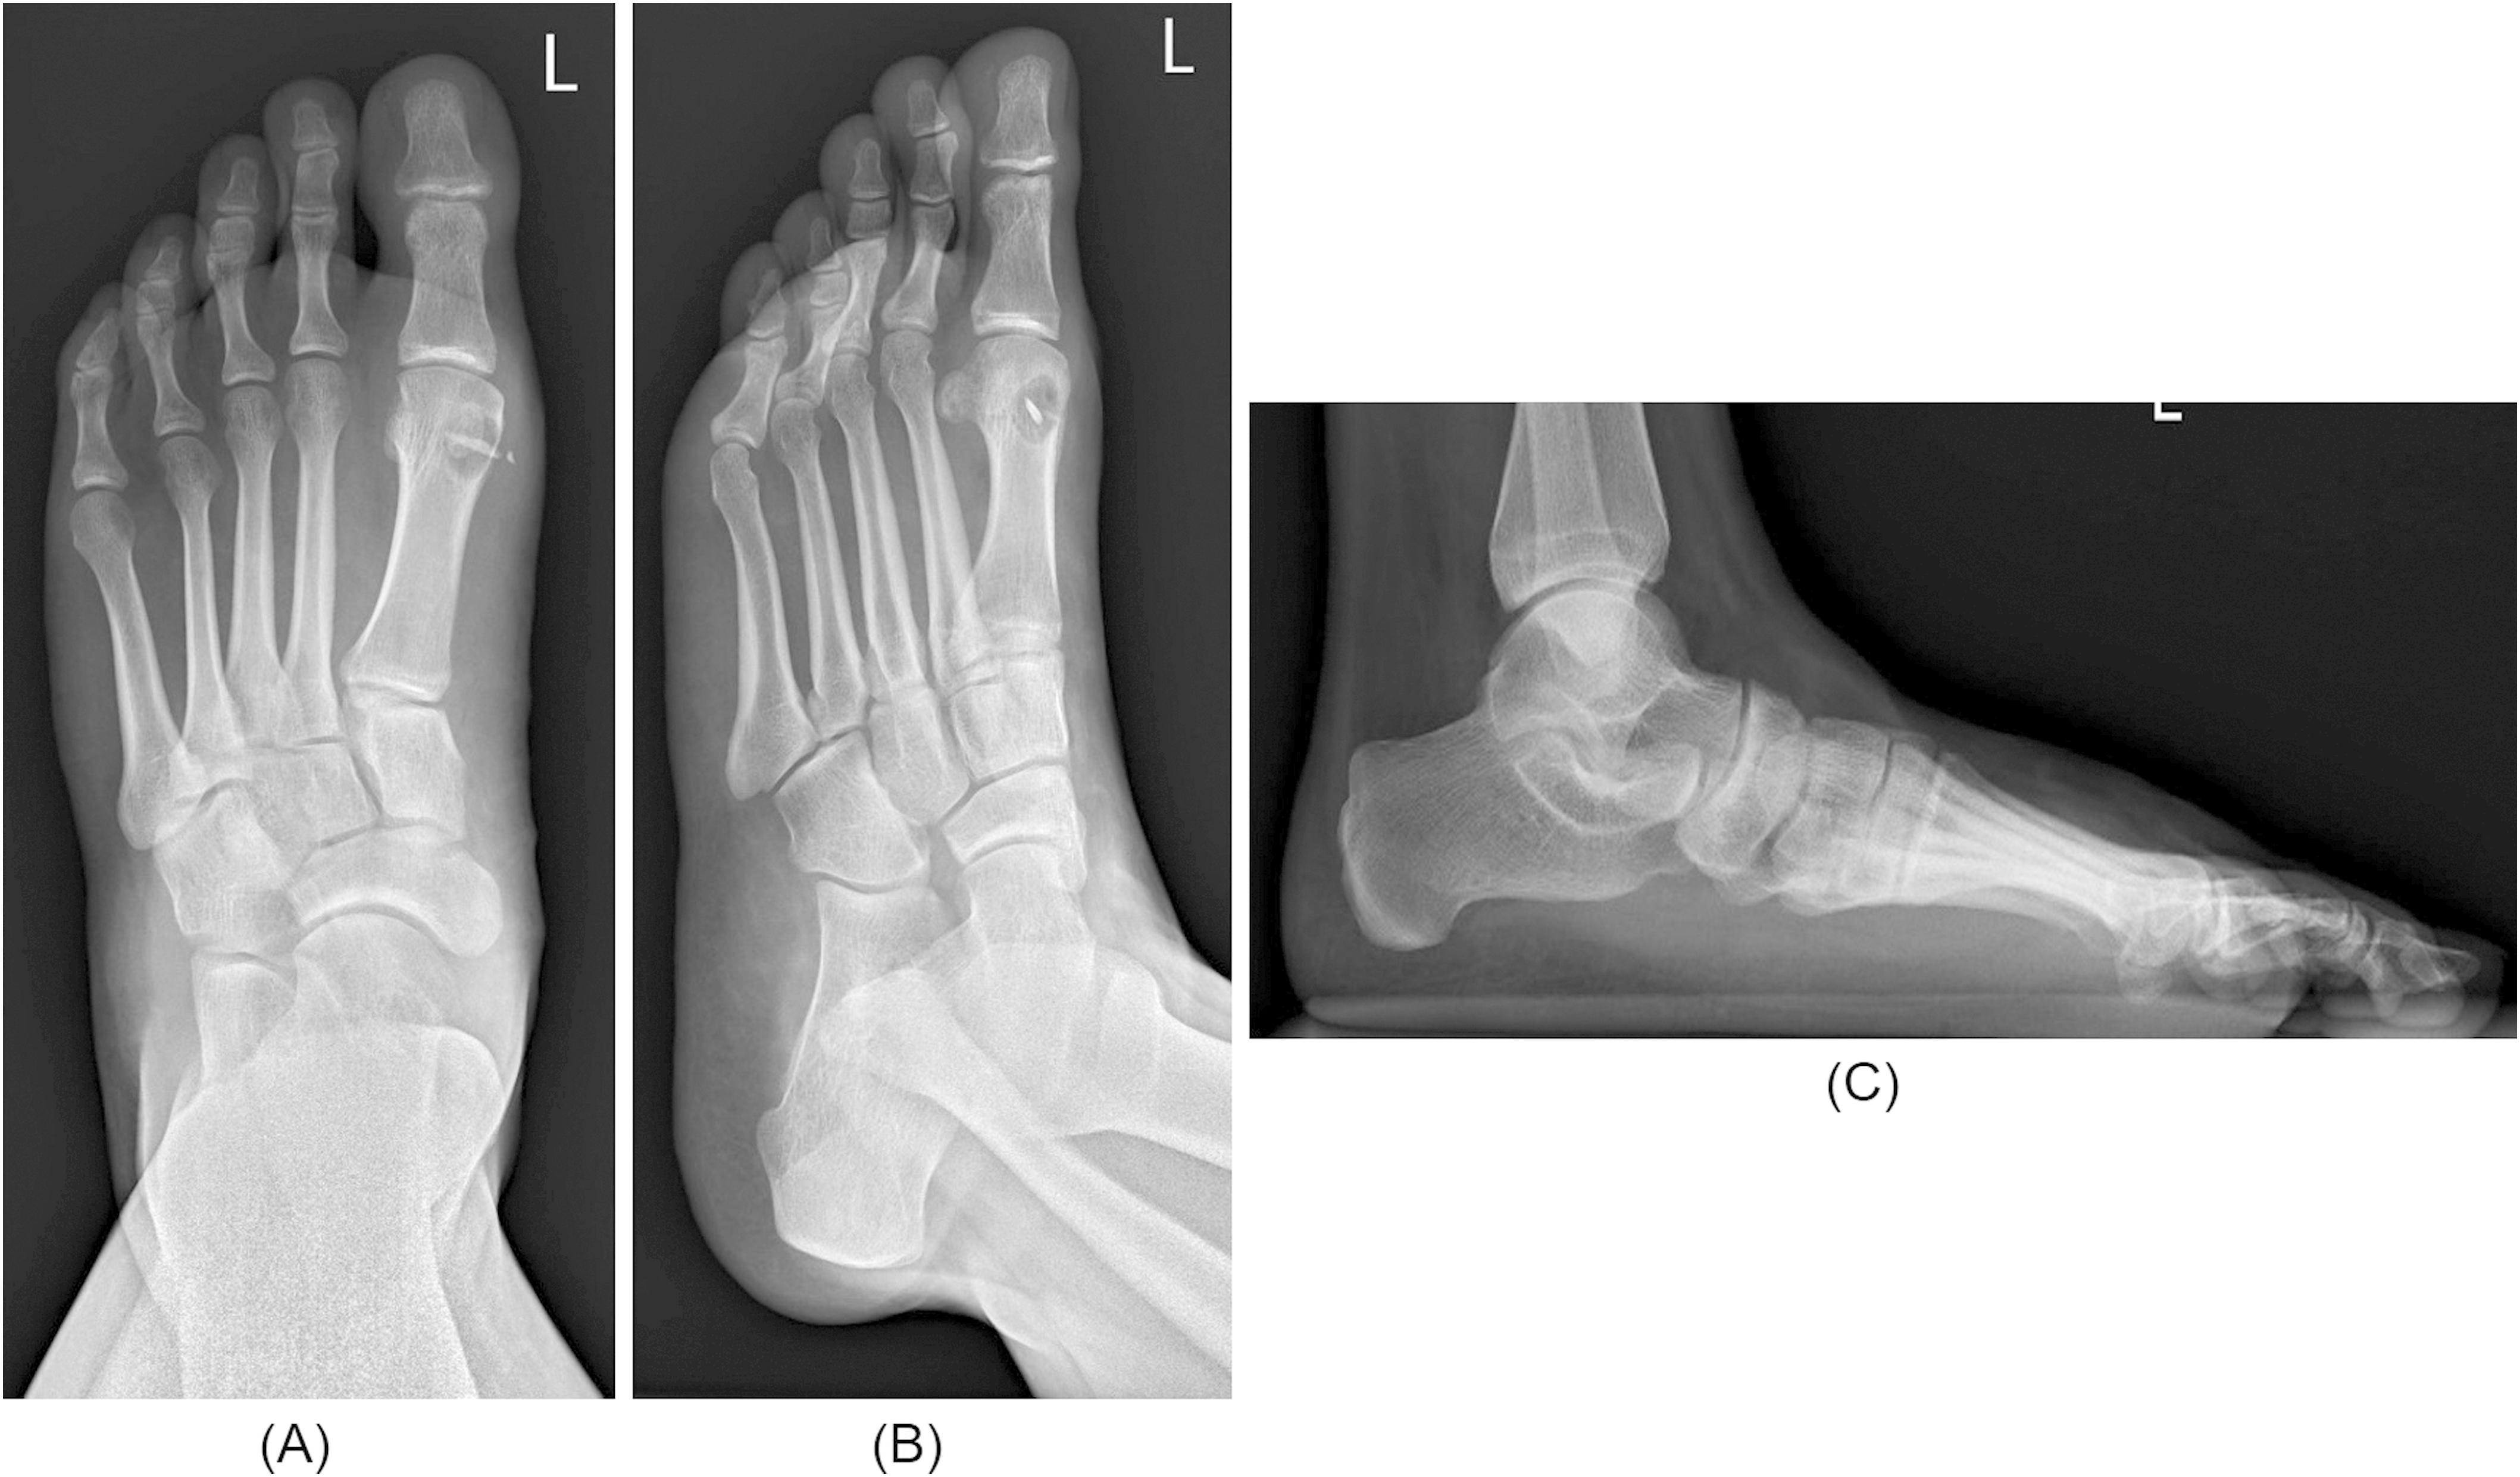 JBJS: Osteolytic Lesion of the First Metatarsal After Catfish Spine Injury